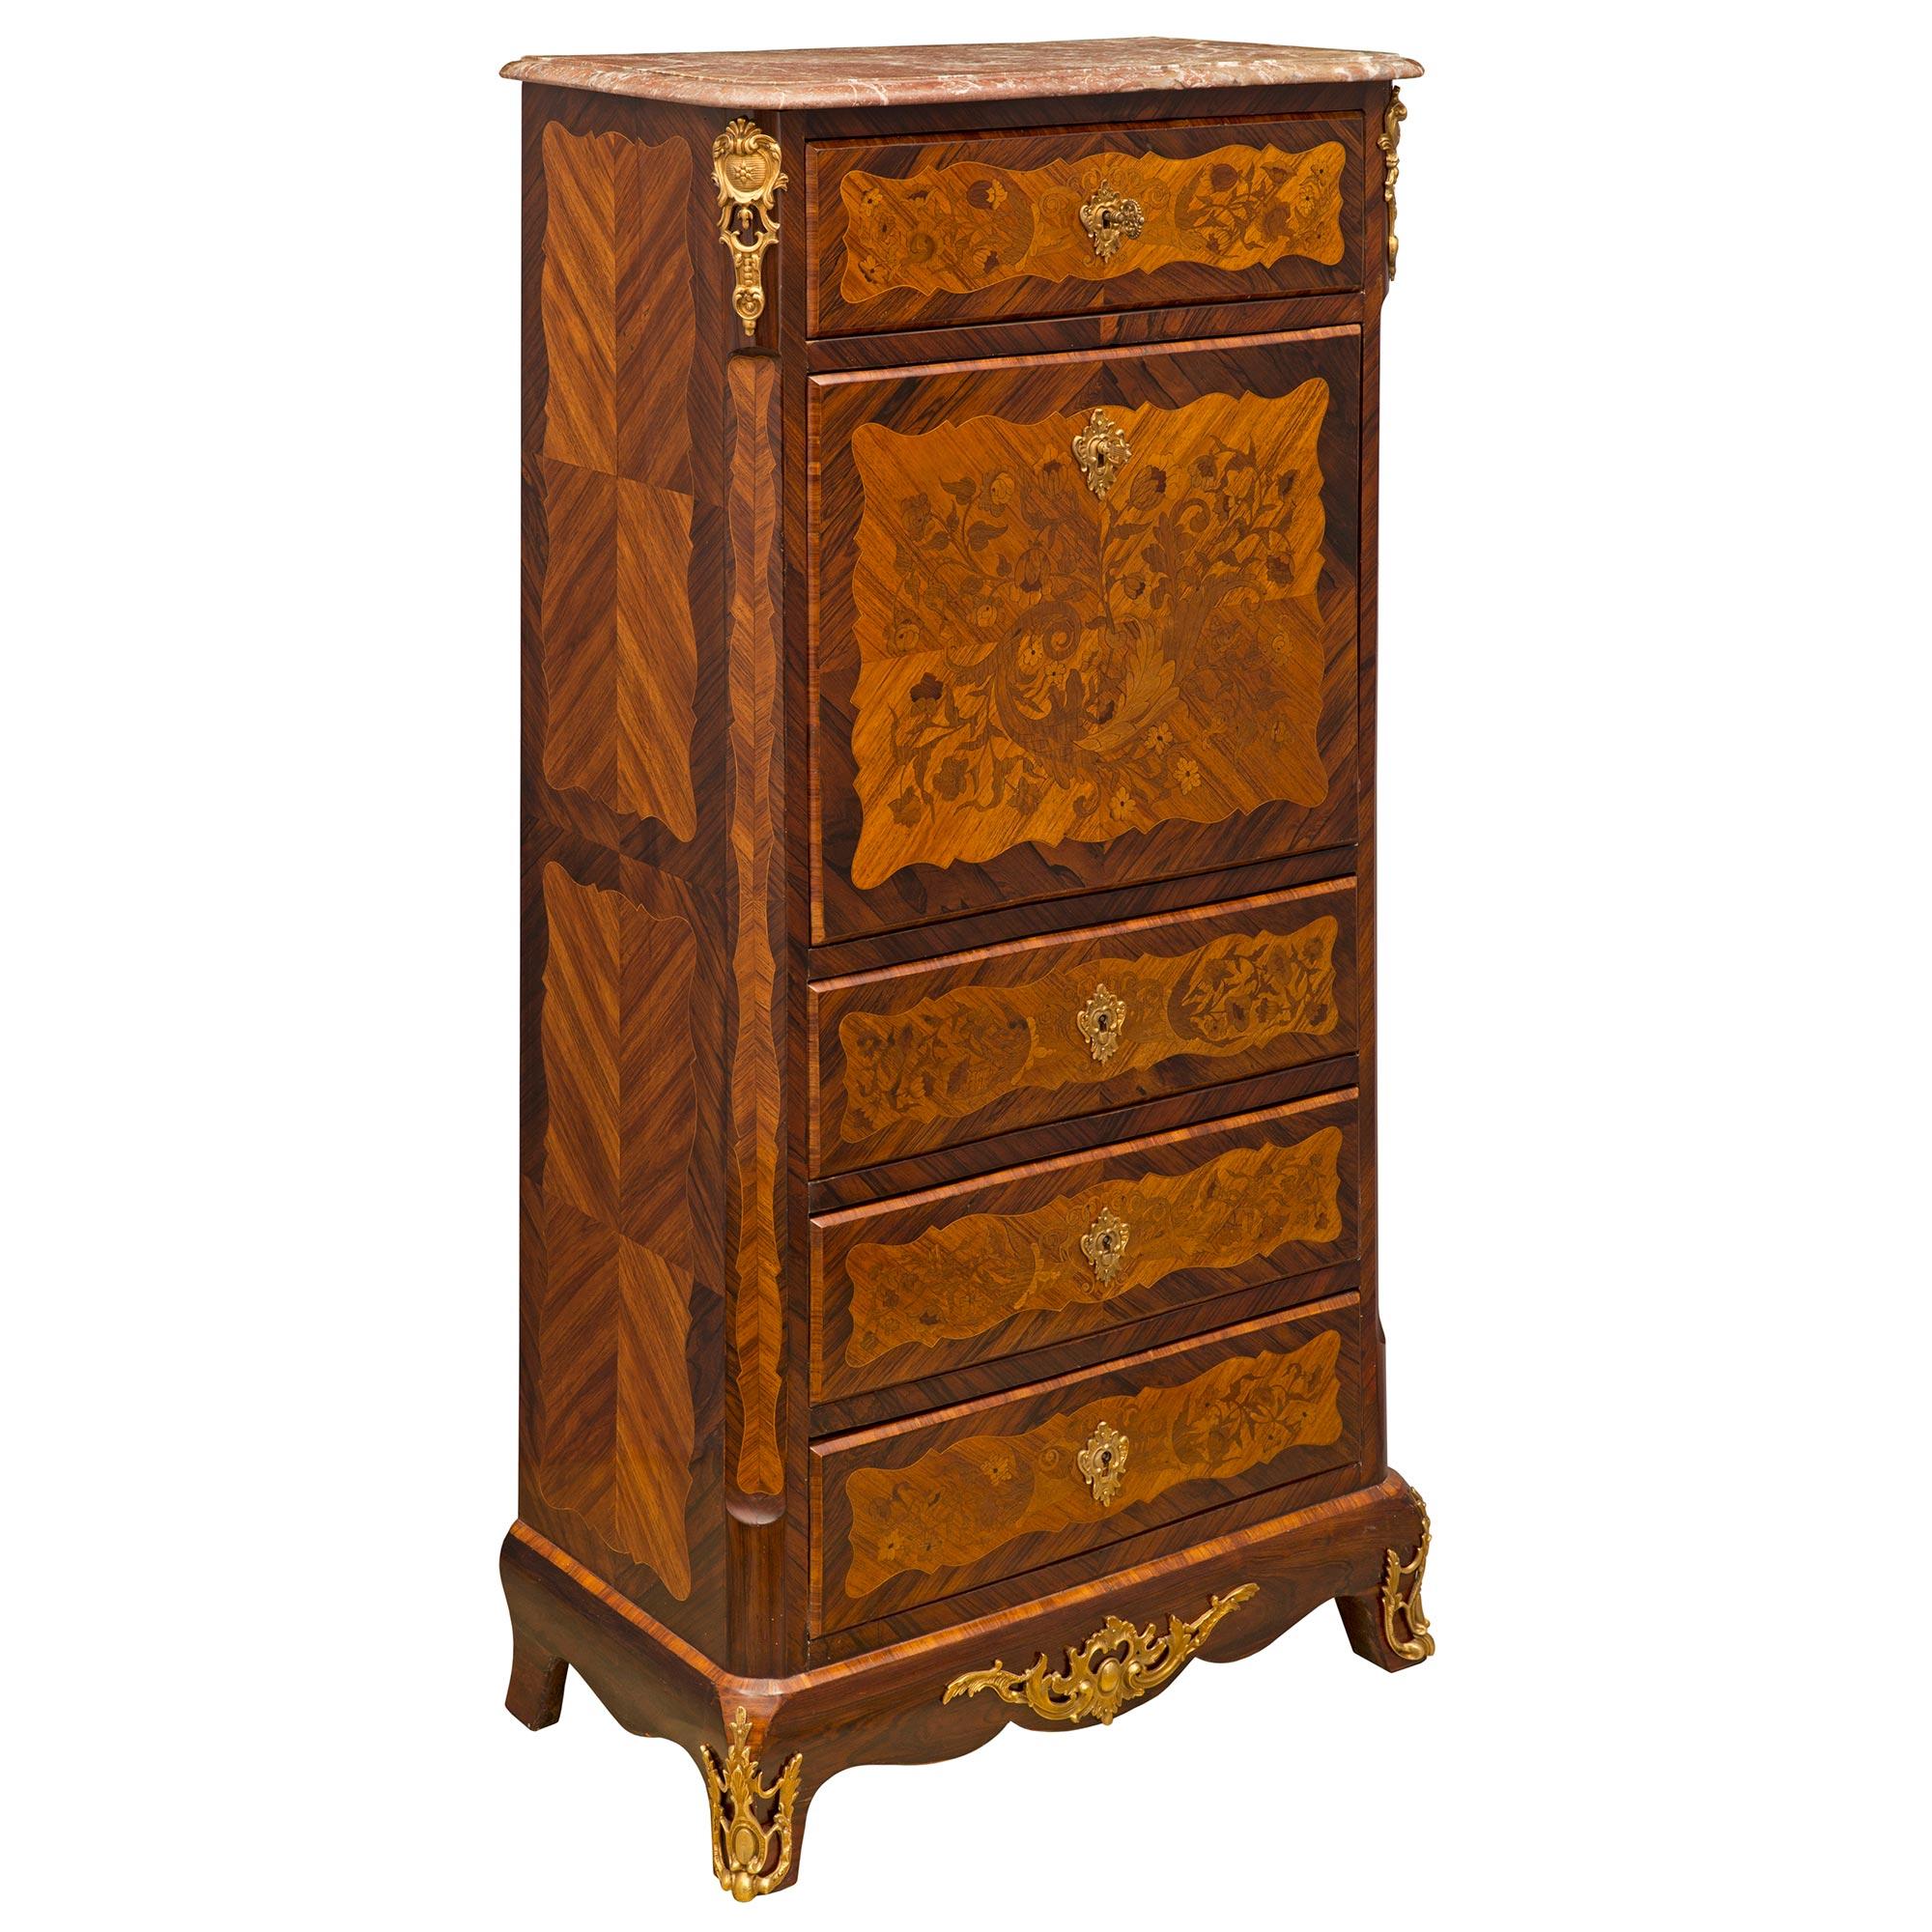 French, 19th Century, Transitional Style Tulipwood and Kingwood Secretary For Sale 1